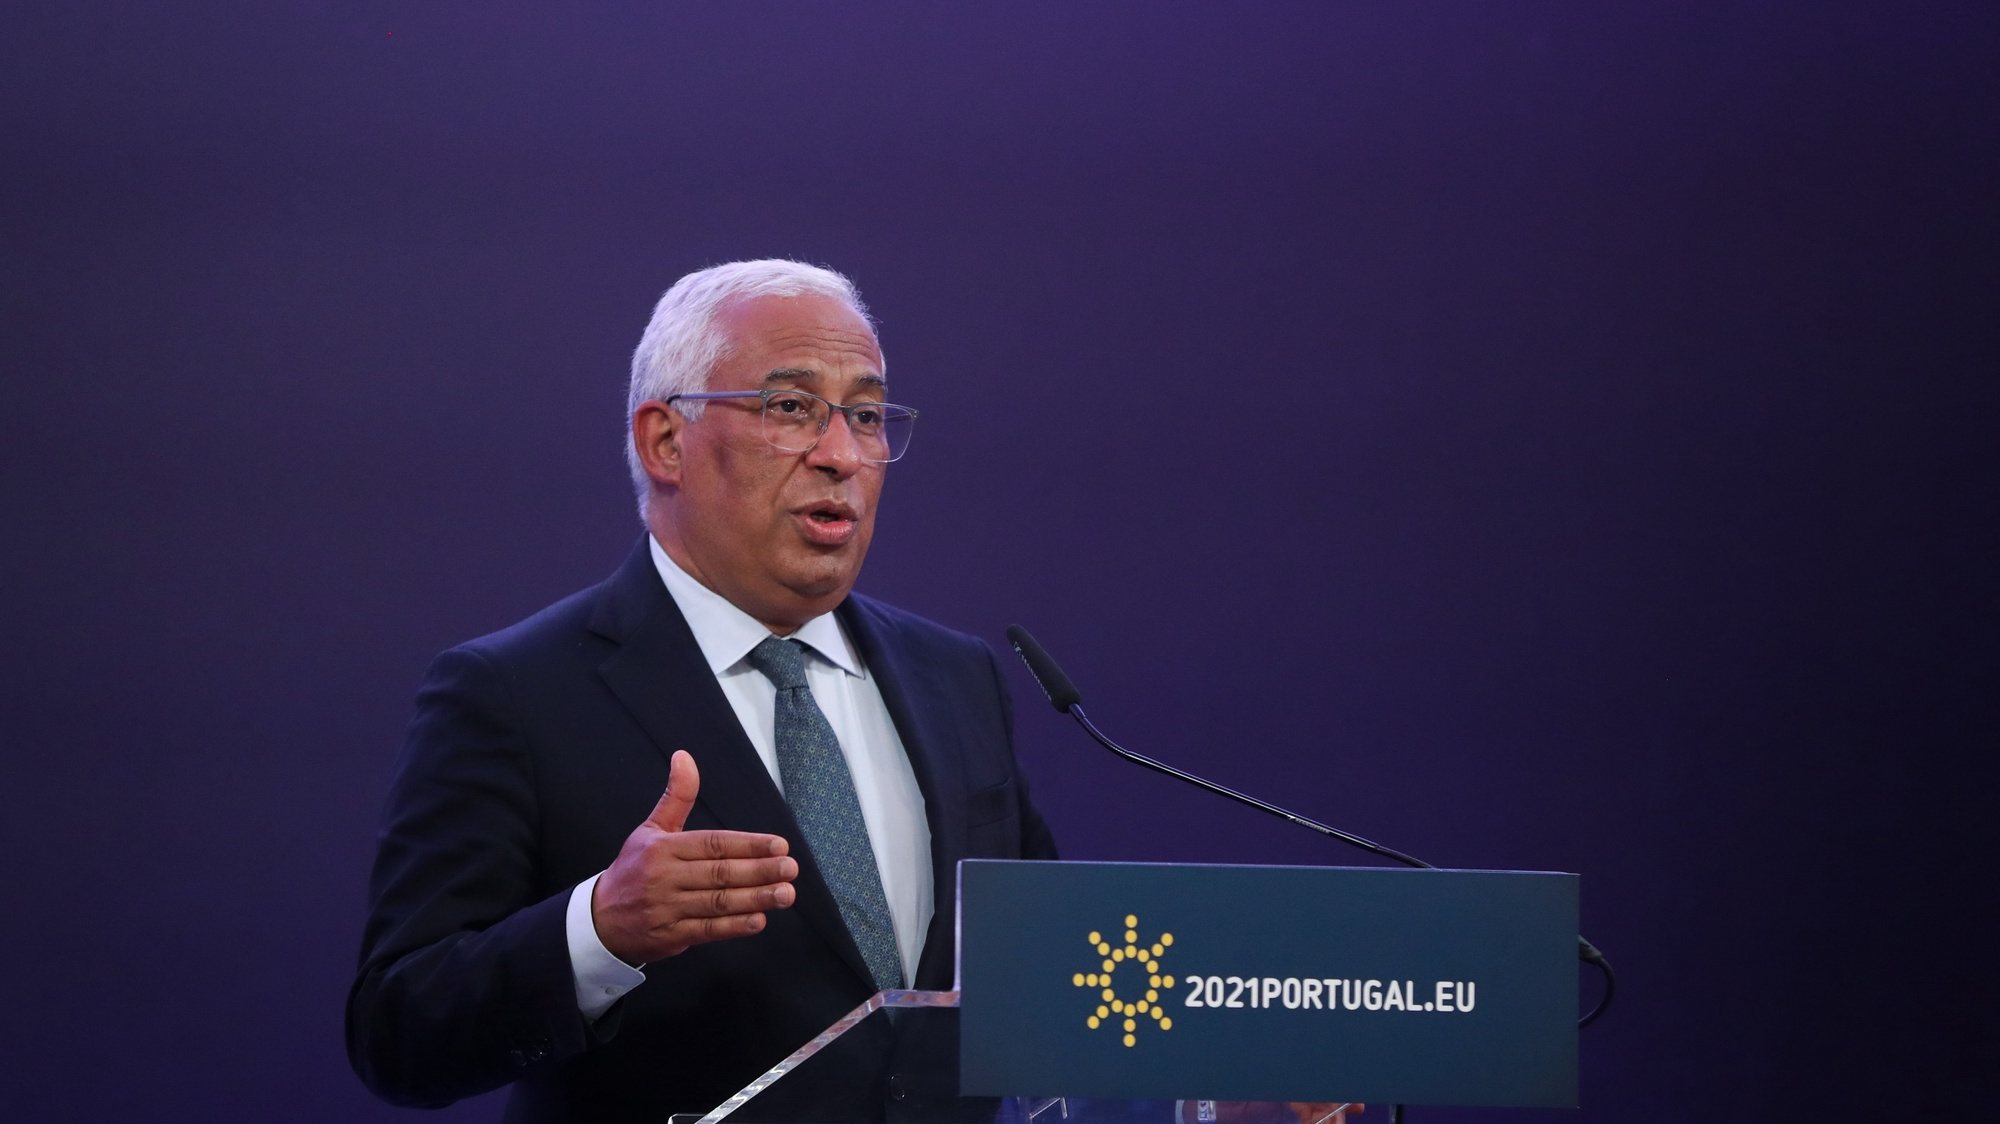 epa09097926 Portuguese Prime Minister, Antonio Costa, speaks during the press conference at the end of the European Council meeting, at Centro Cultural de Belem, Lisbon, Portugal, 25 March 2021.  EPA/MARIO CRUZ